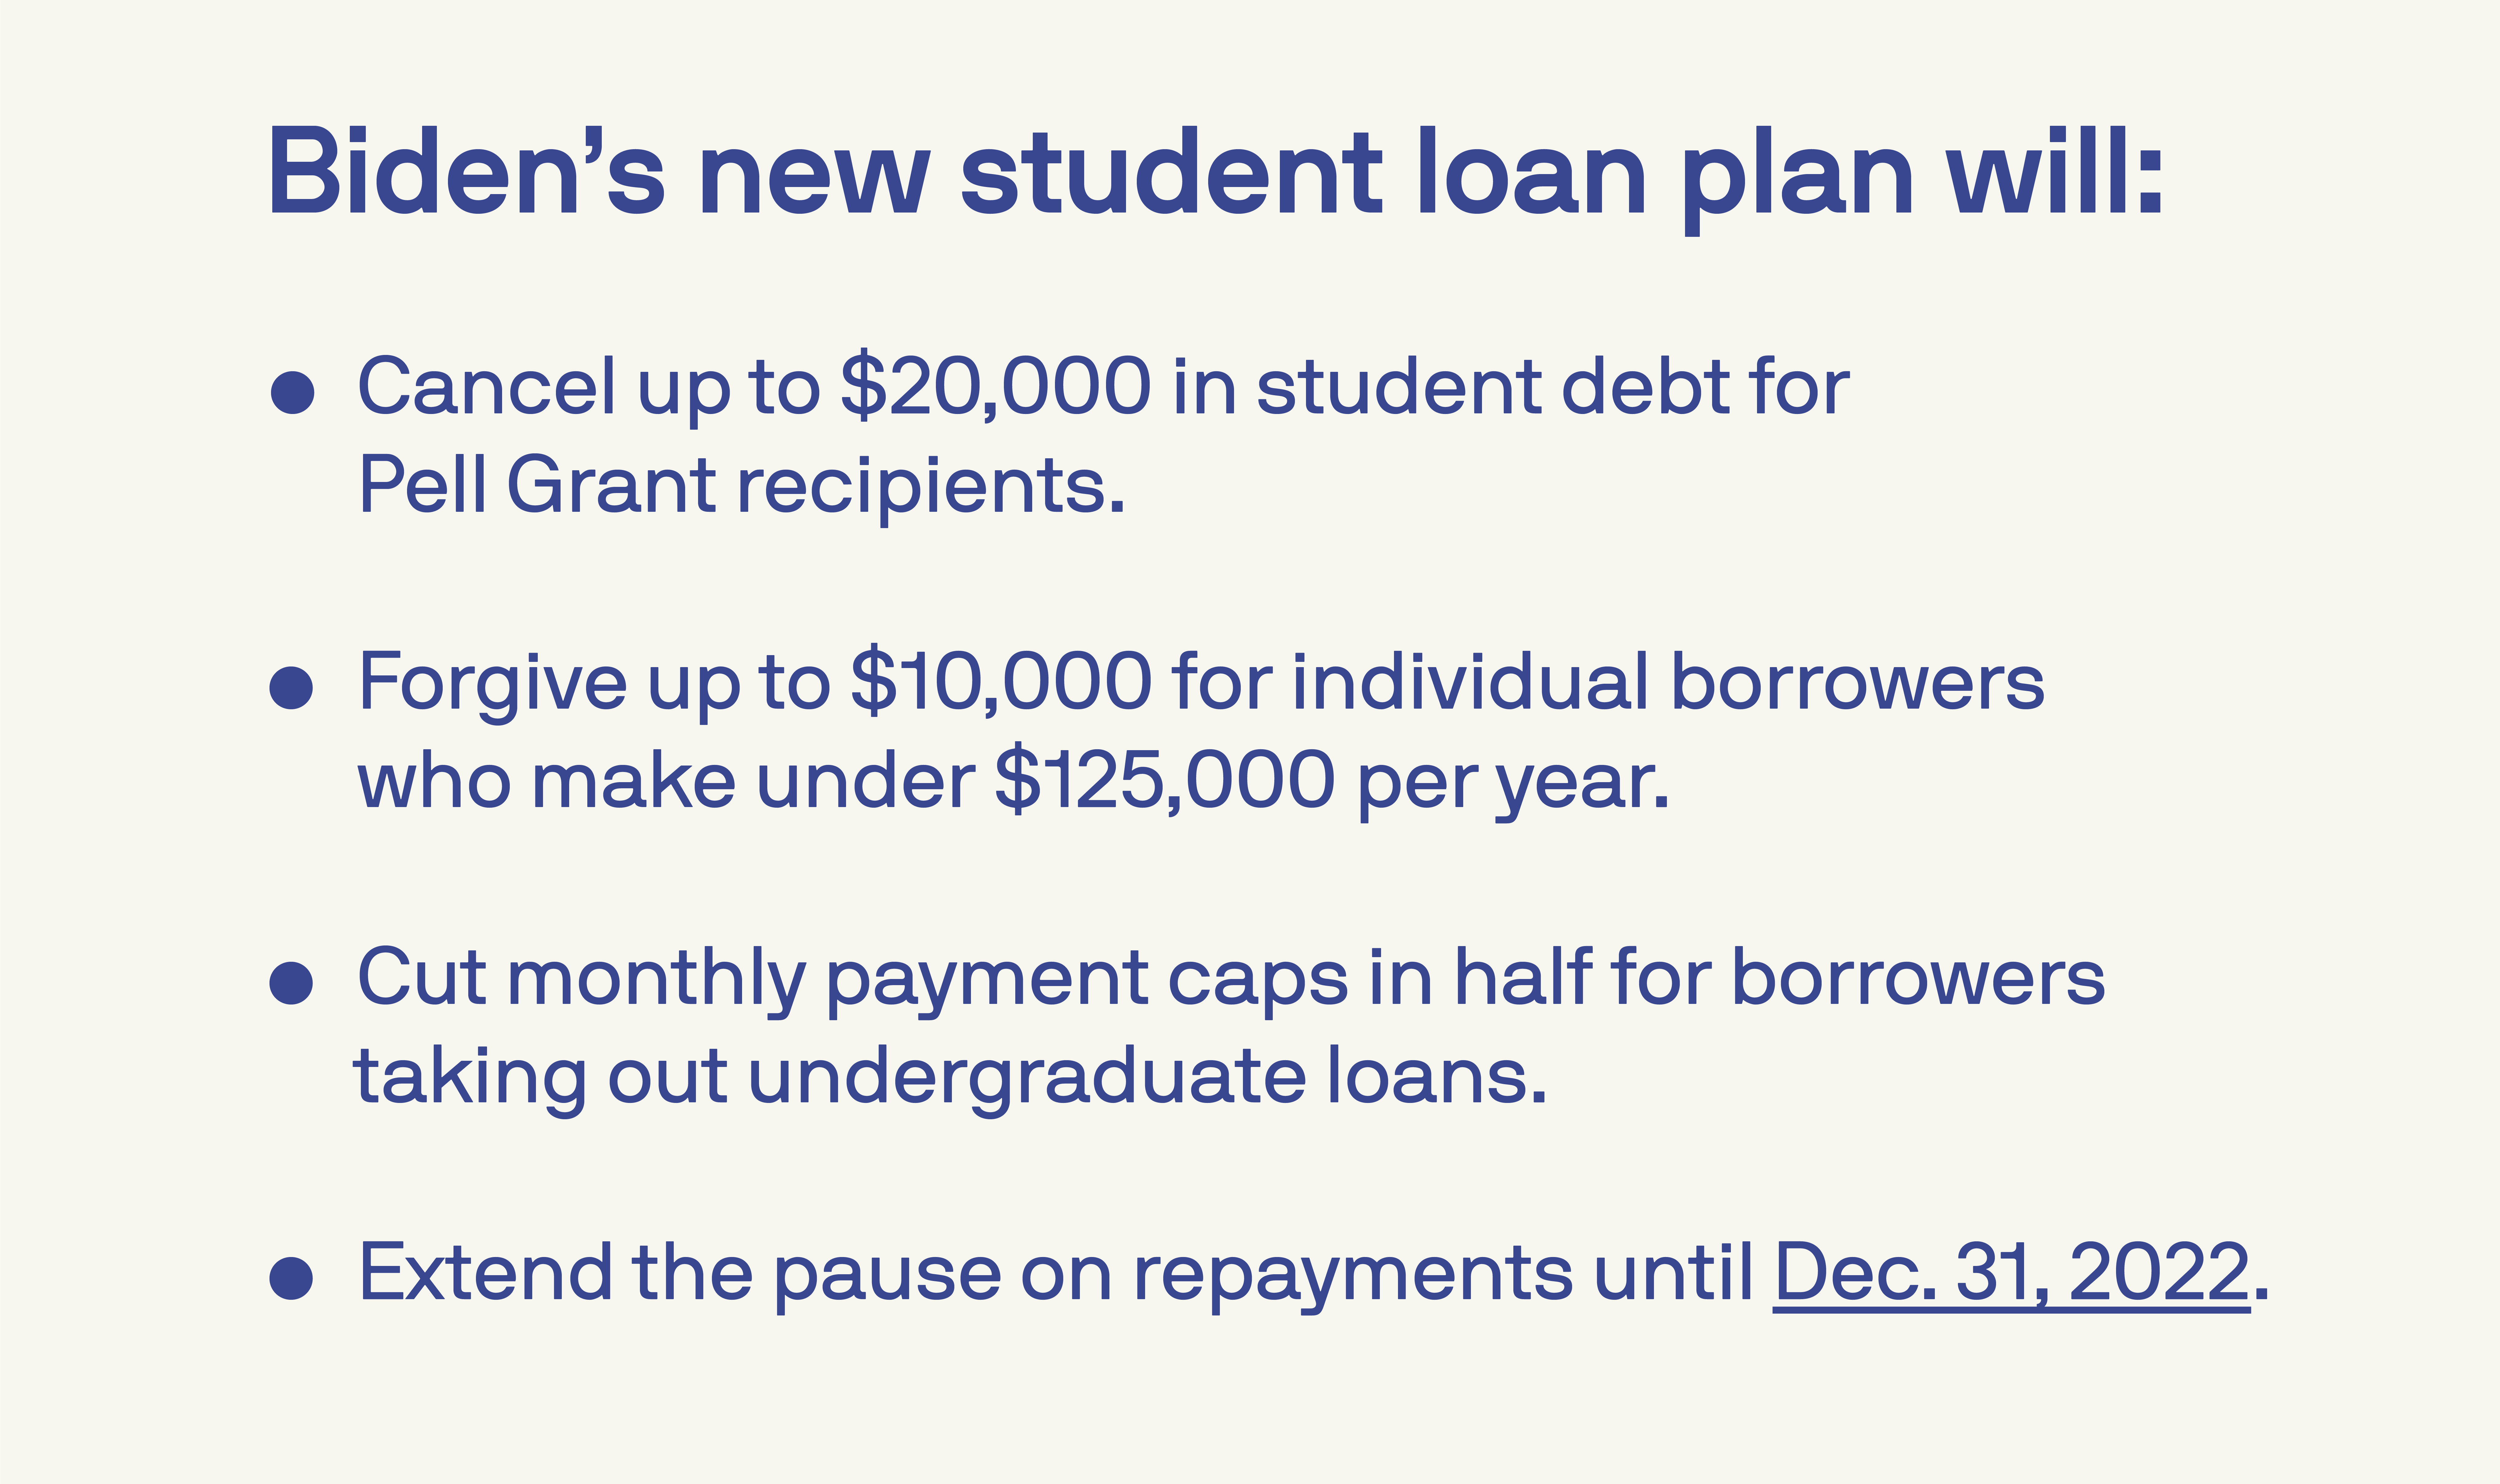 a list of the benefits of the student loan forgiveness plan